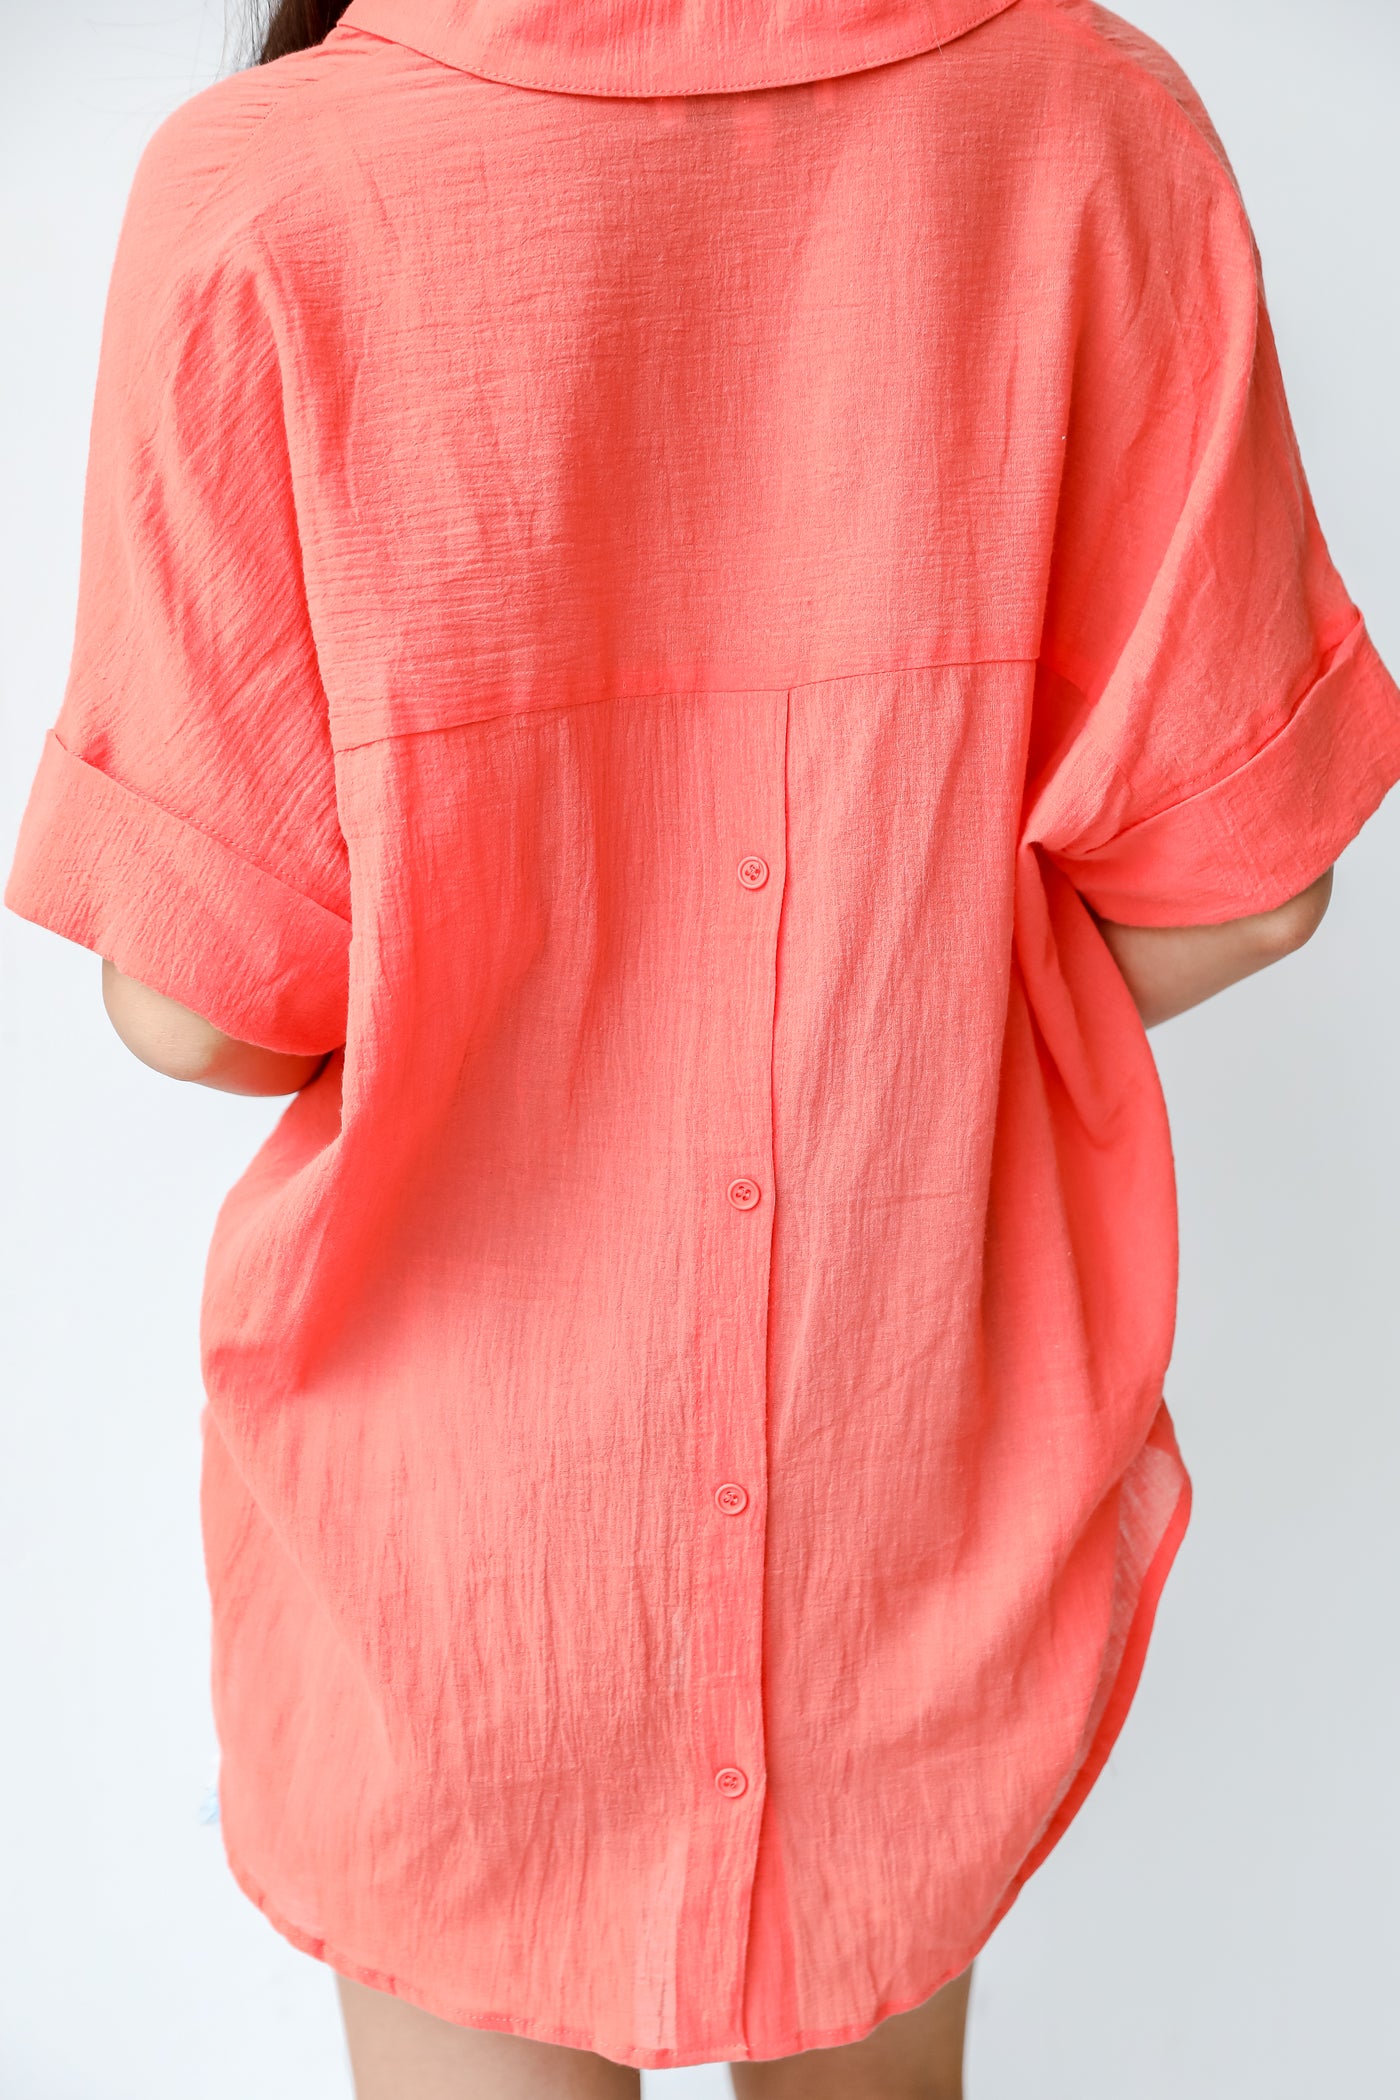 Linen Blouse in coral back view